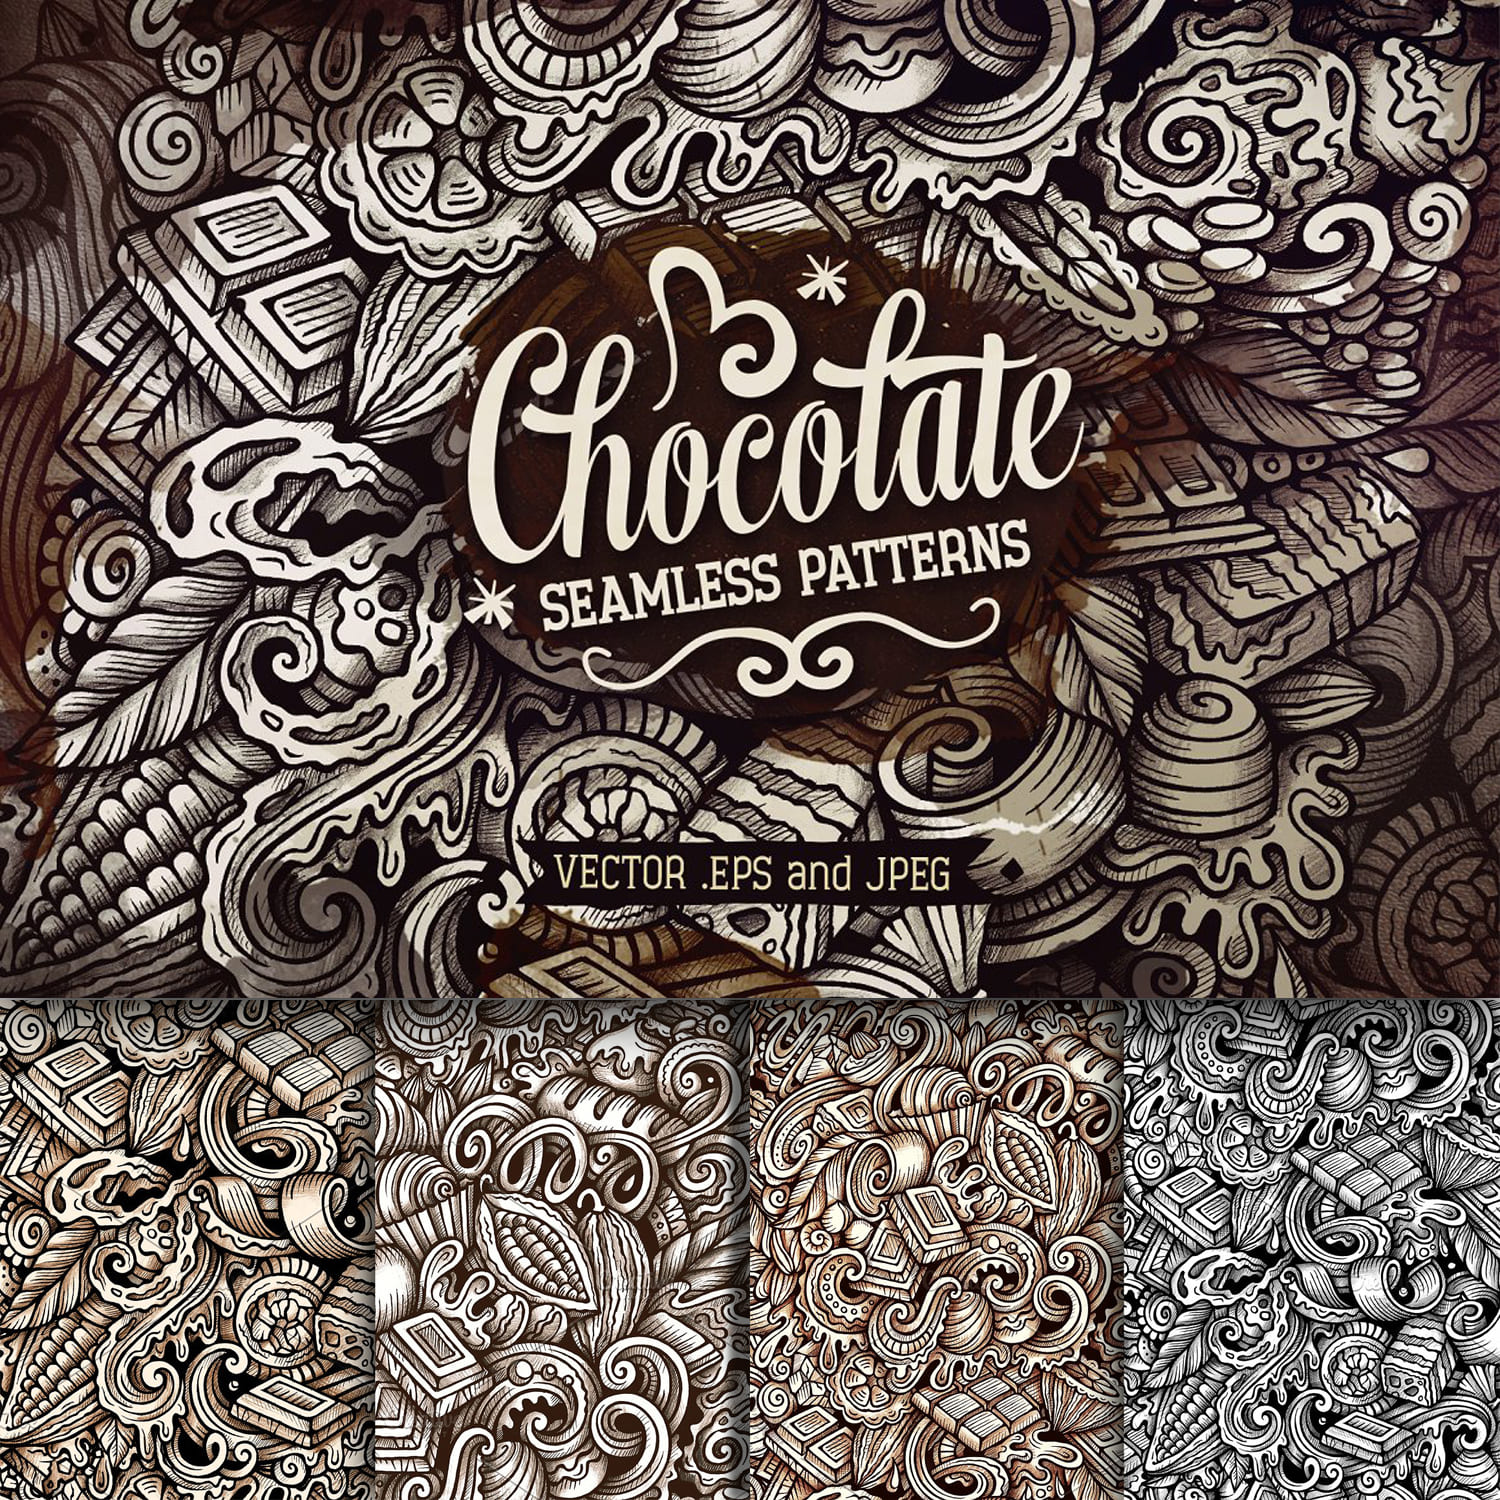 Chocolate Graphics Doodle Patterns 1500 1500 2.